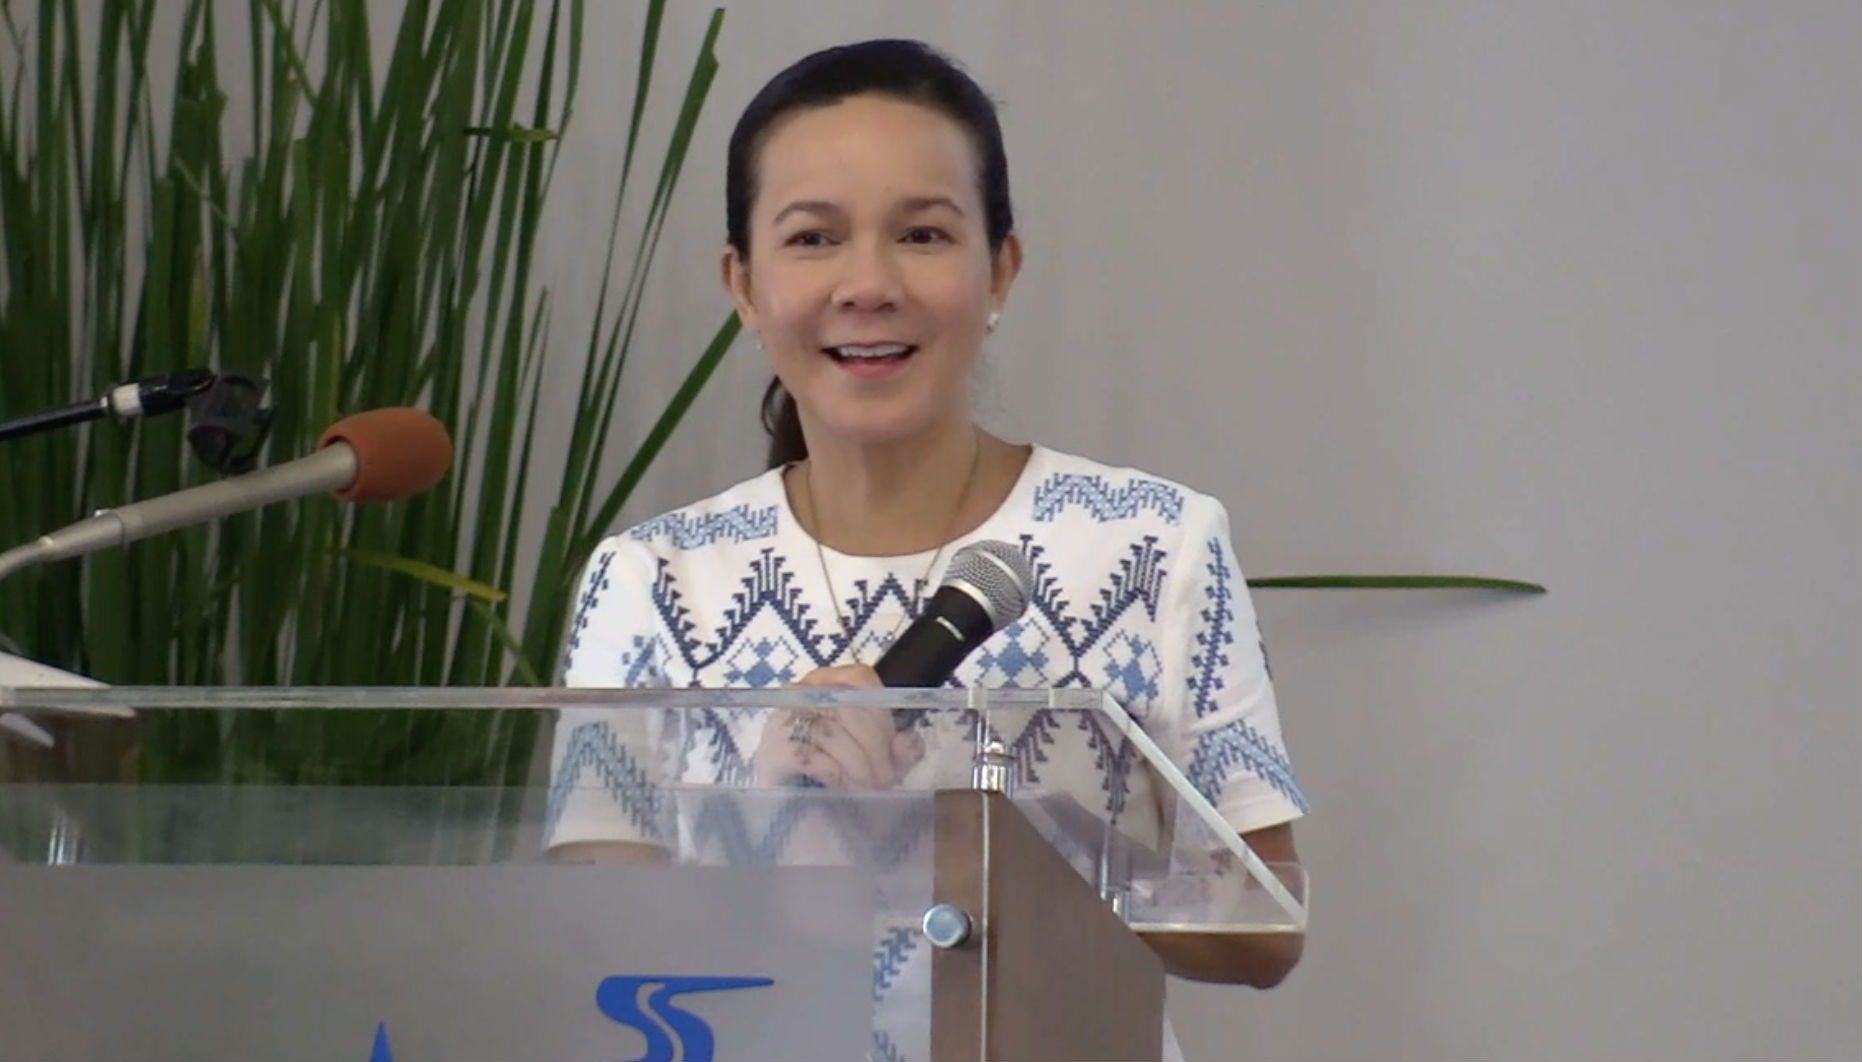 Water catchment areas to help LGUs during dry season – Poe